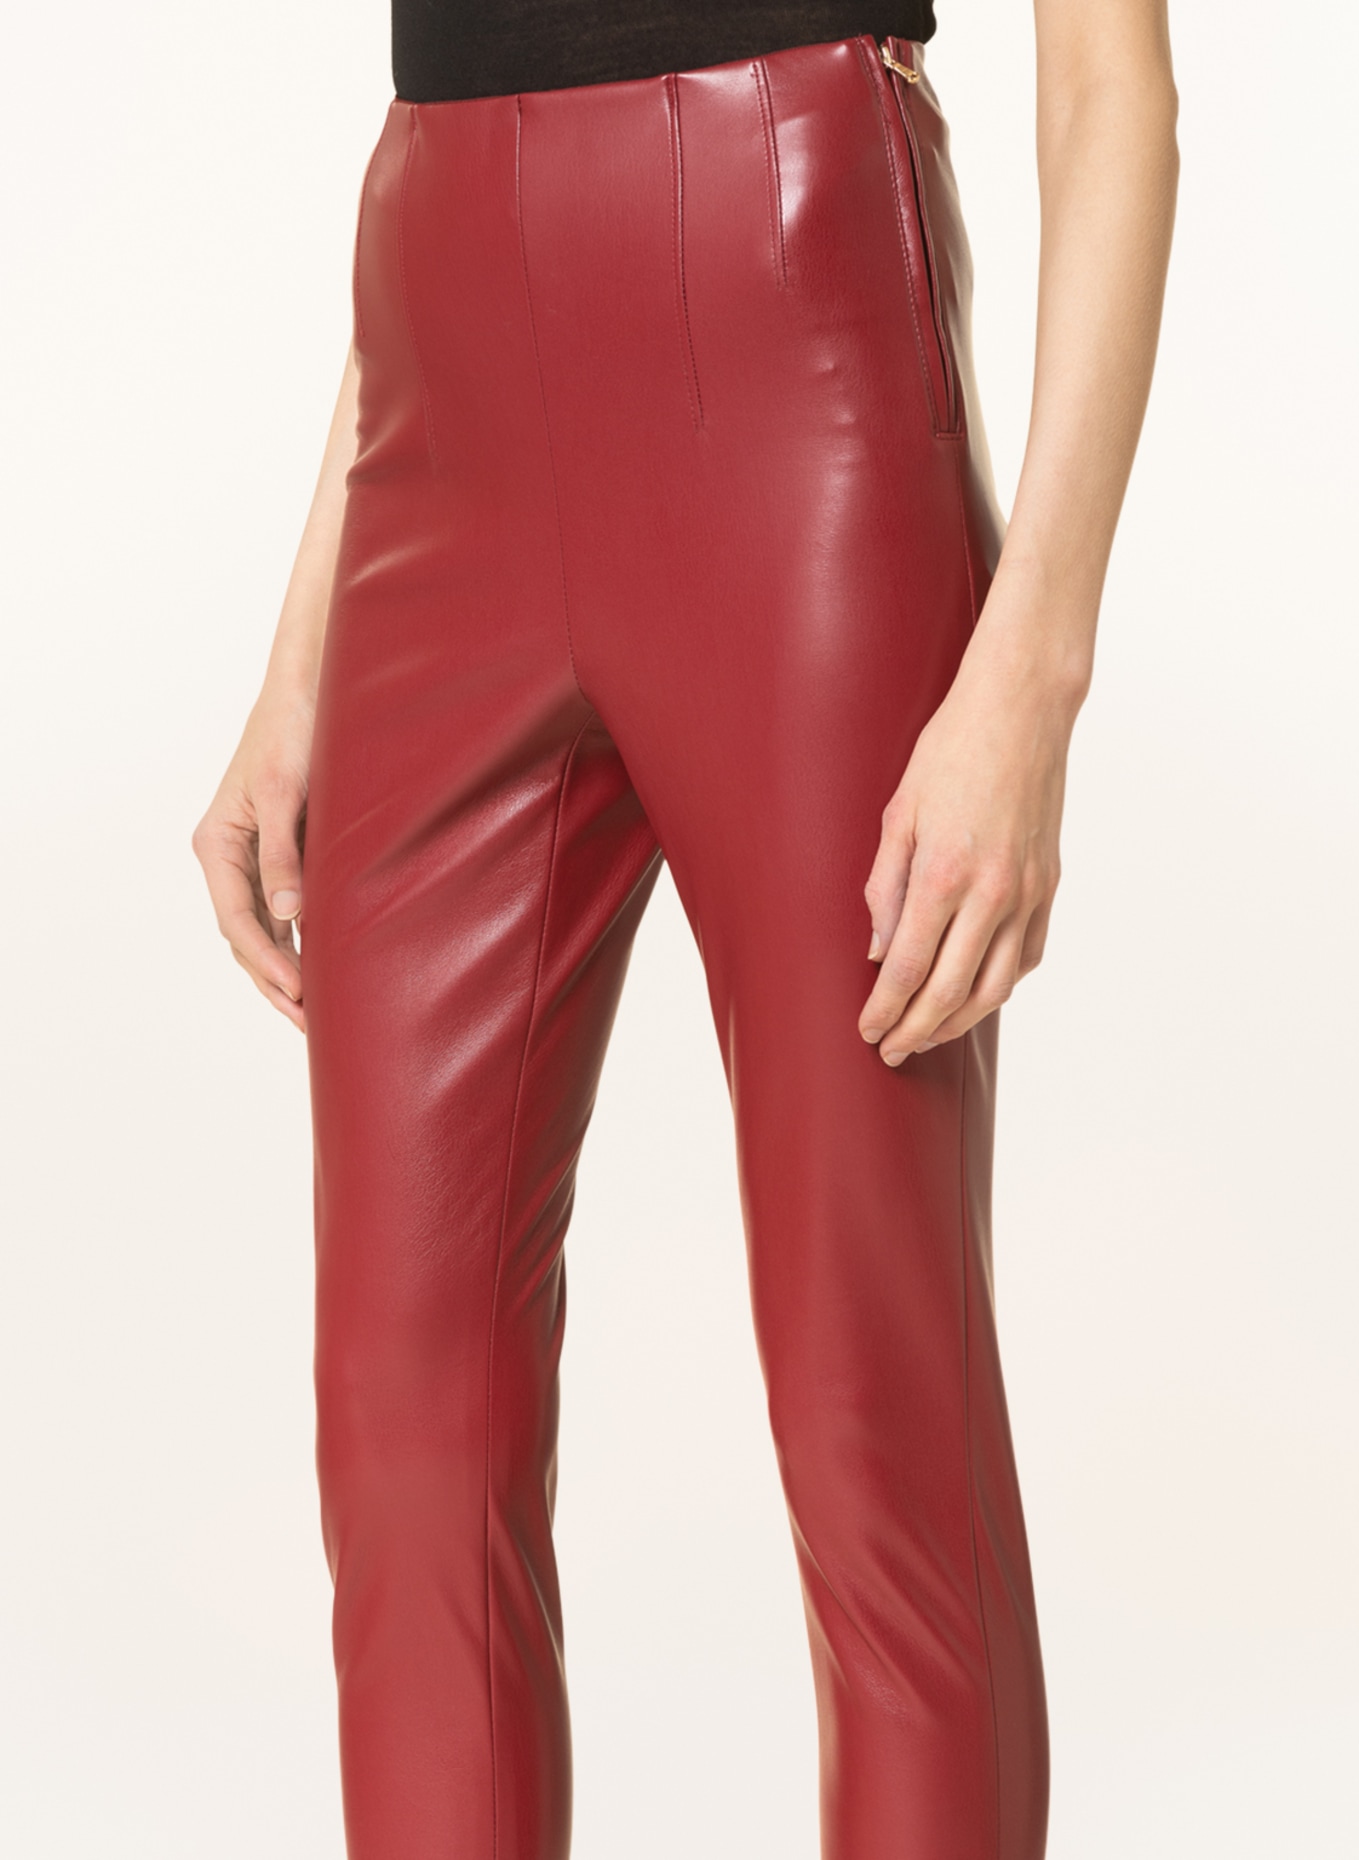 Dninmim Women's Skinny Low Waist Slim Pu Leather Pants Wine Red Sexy Faux Leather  Pants at Amazon Women's Clothing store